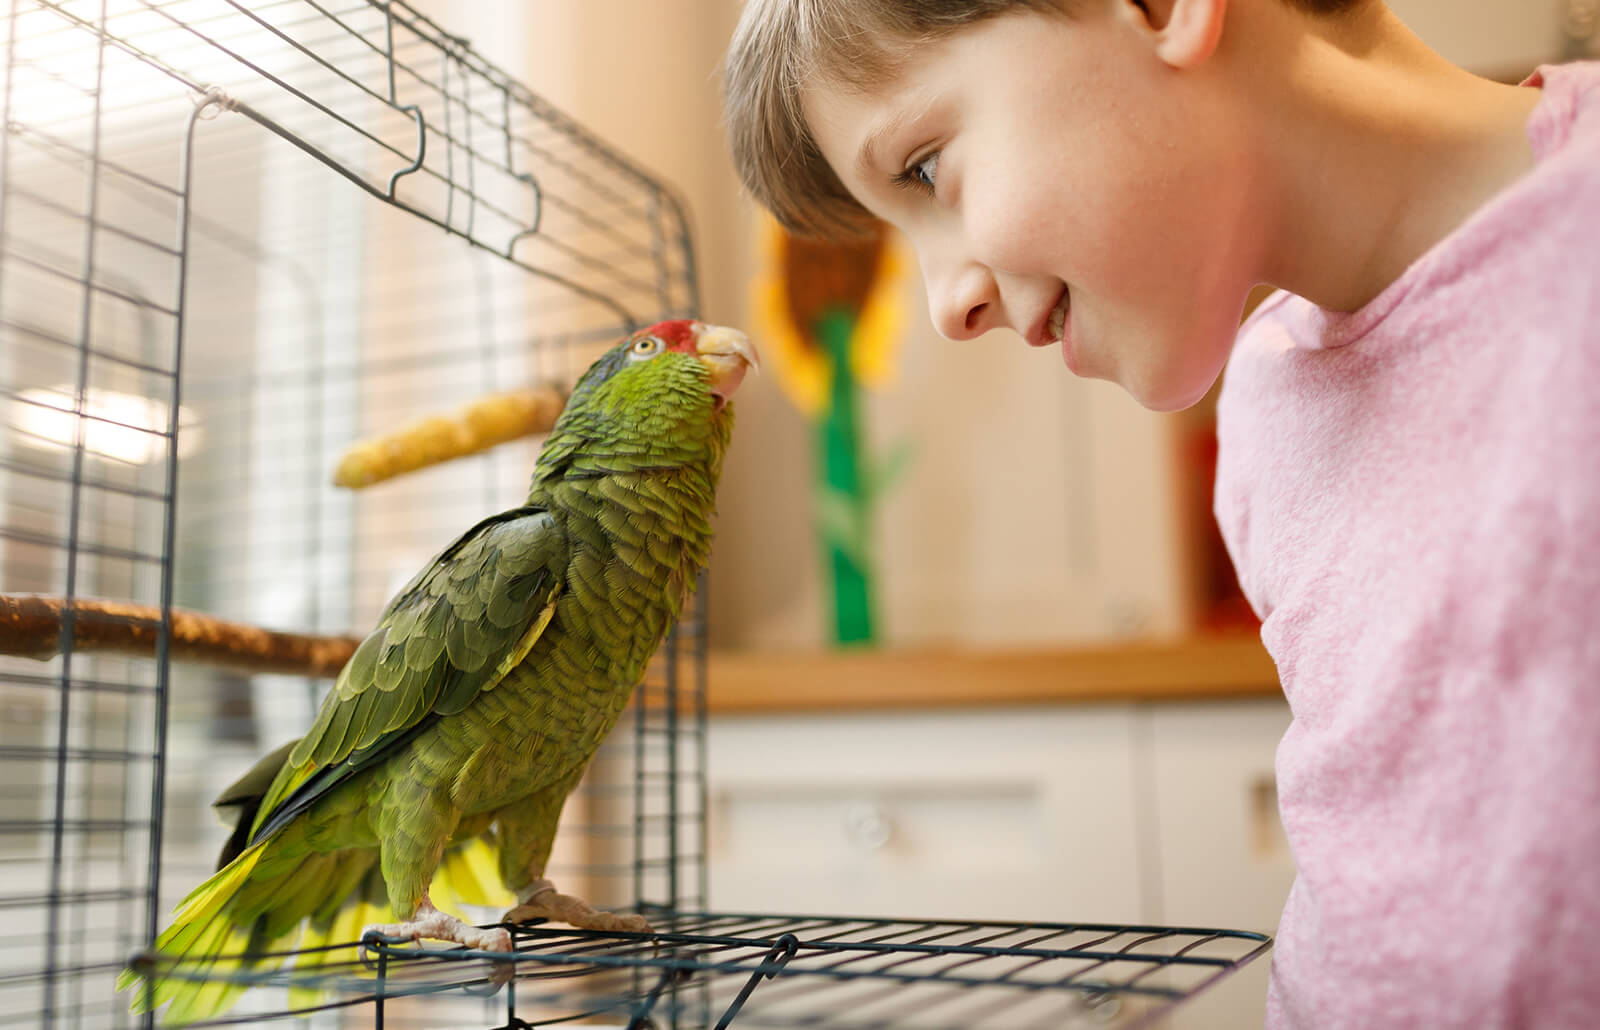 makiandampars - what do you know about pacheco's disease in pet birds